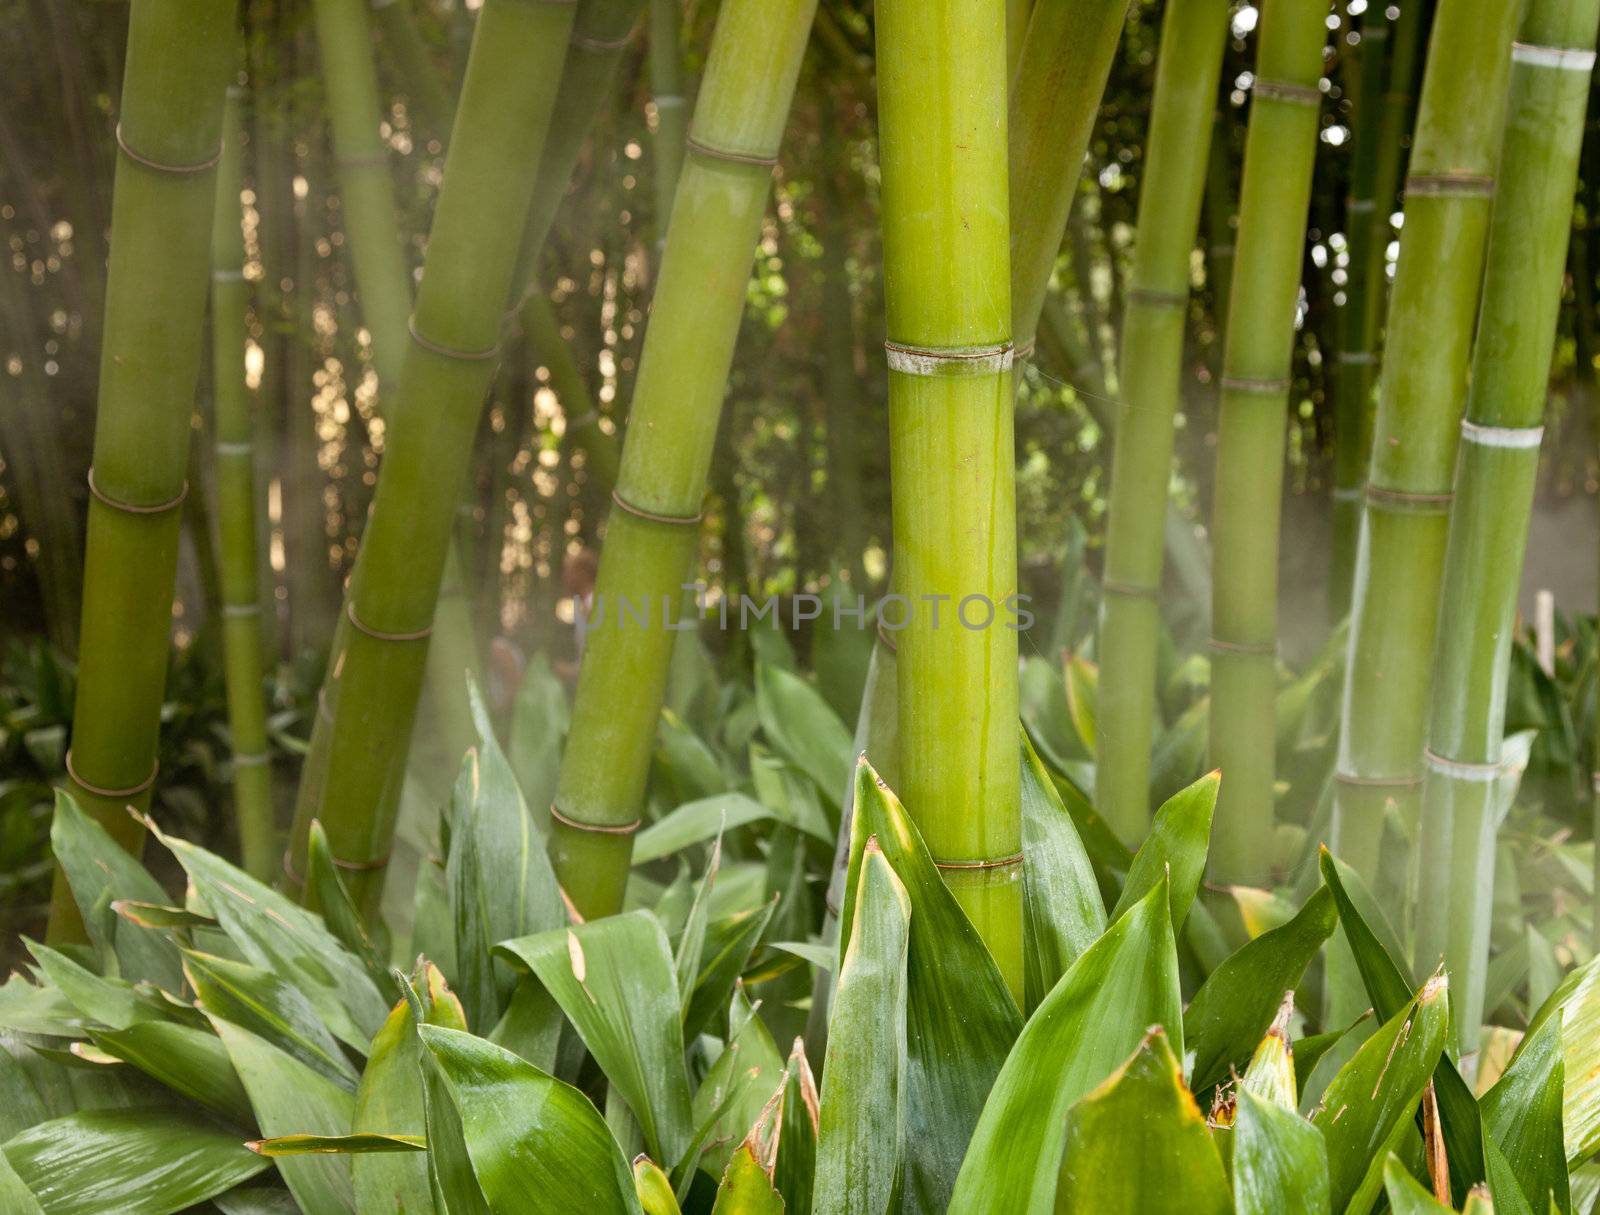 Misty bamboo stems by steheap